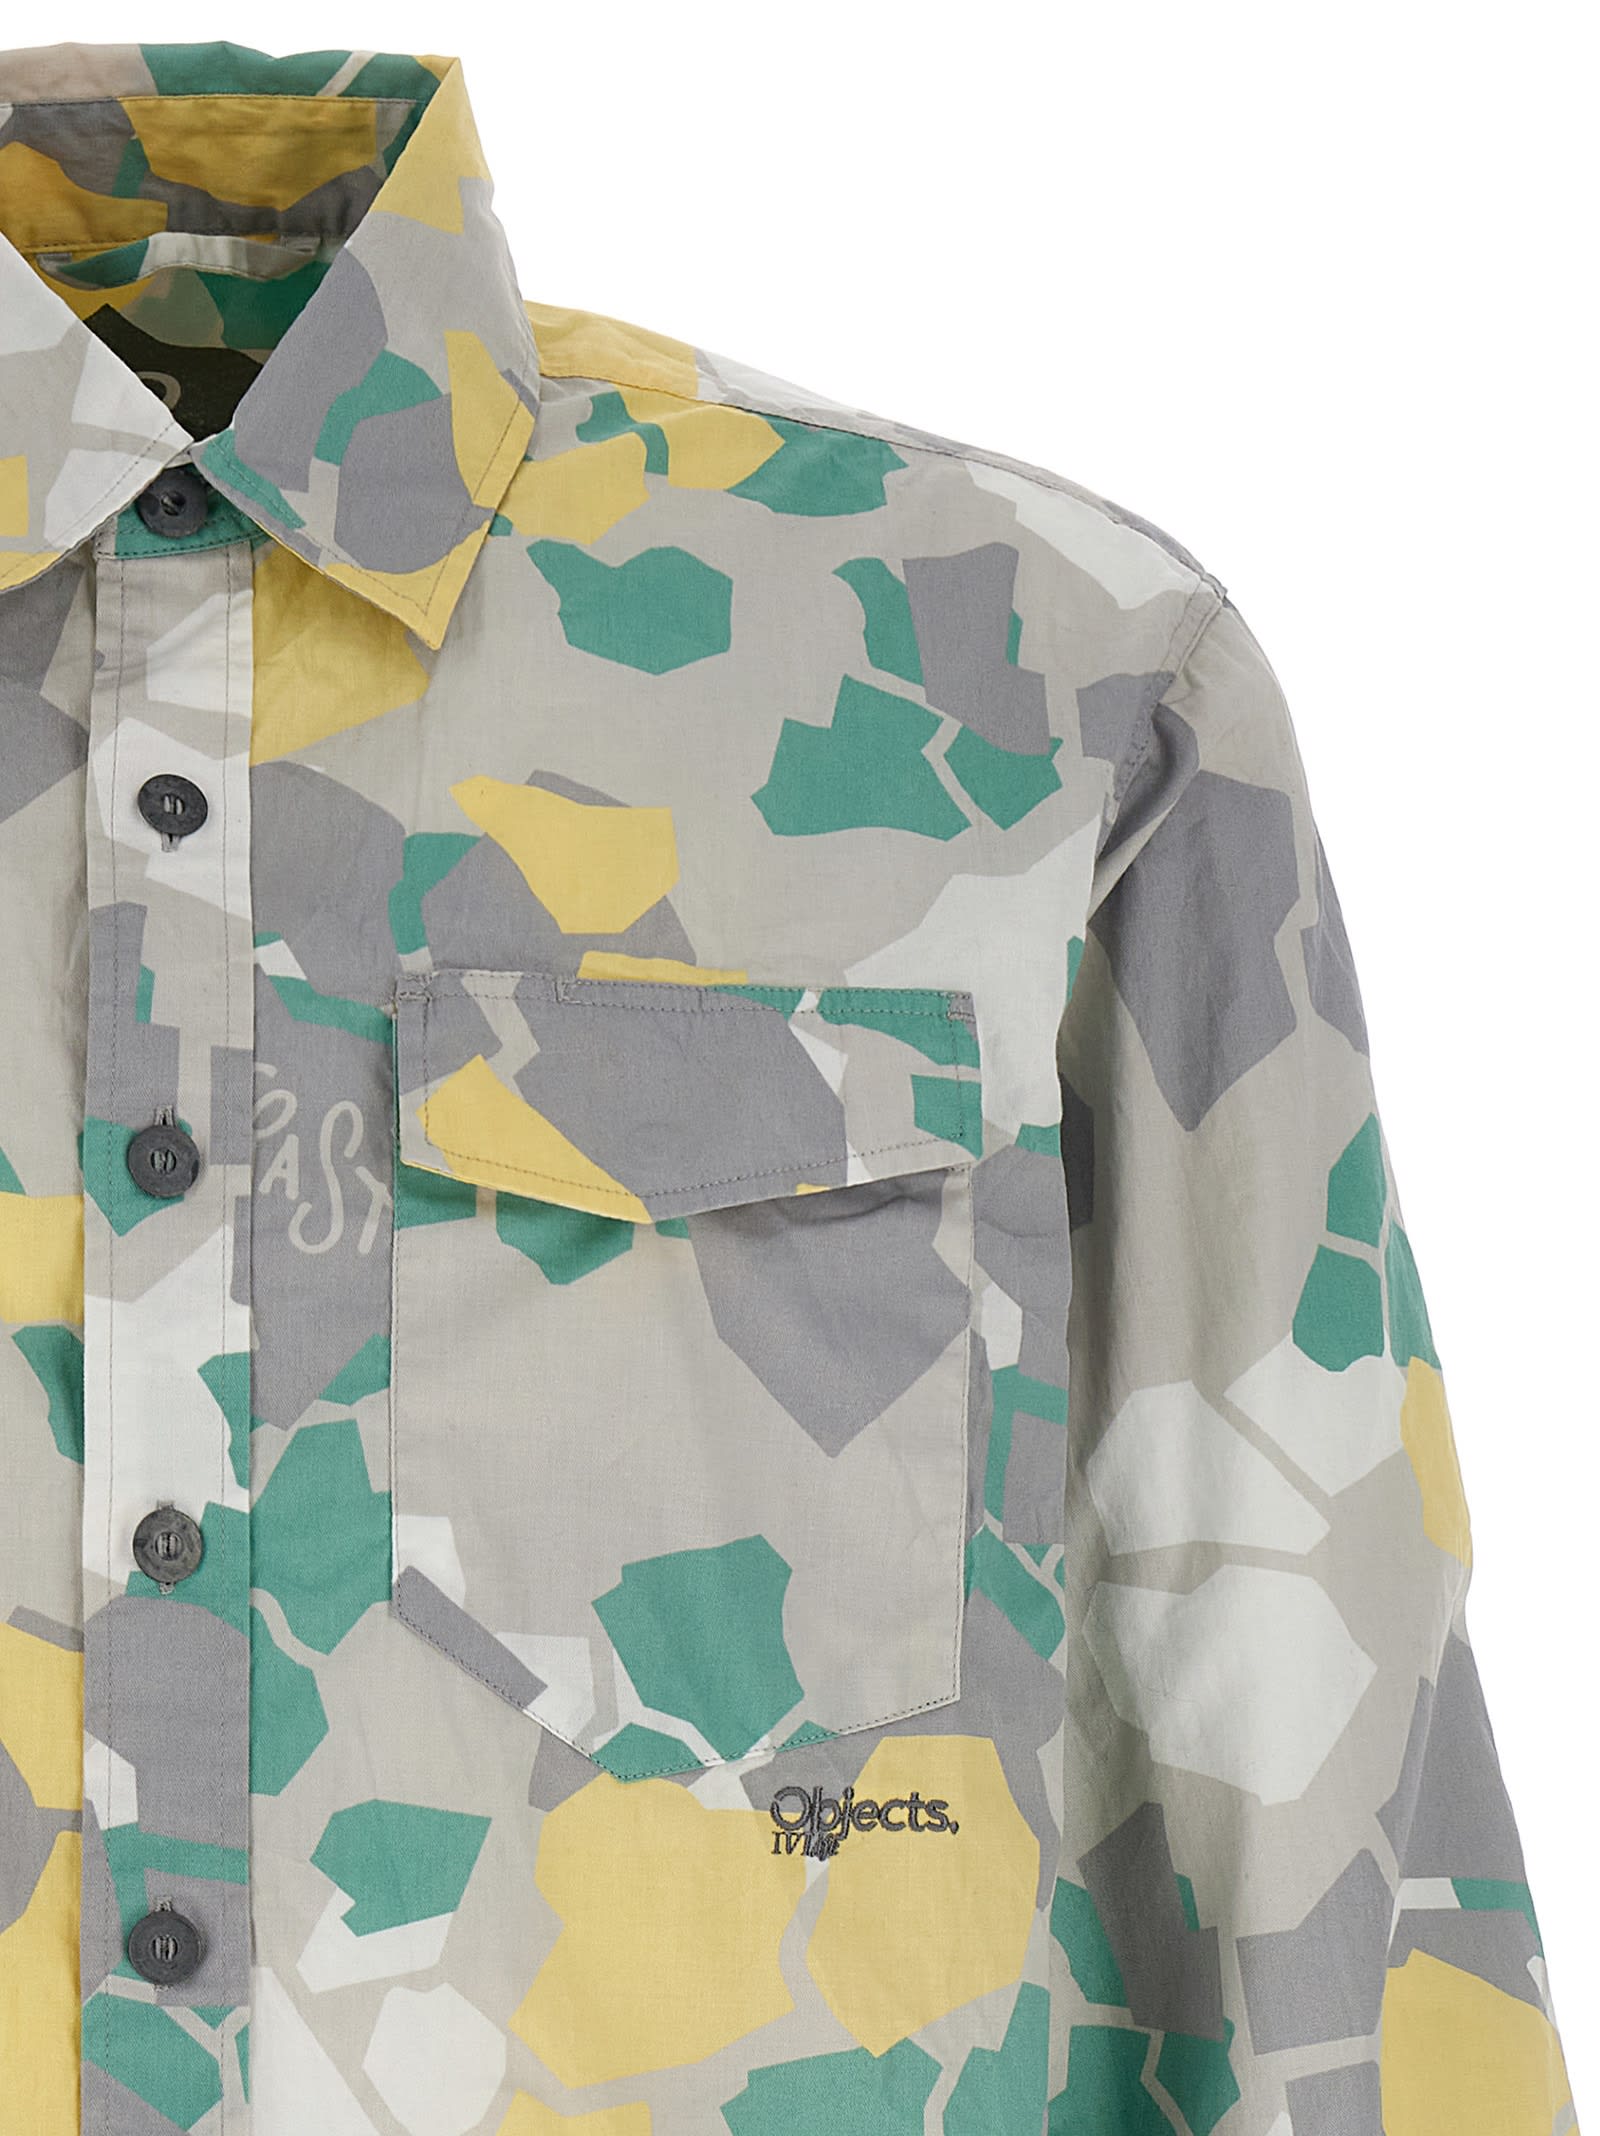 Shop Objects Iv Life Workwear Shirt In Multicolor